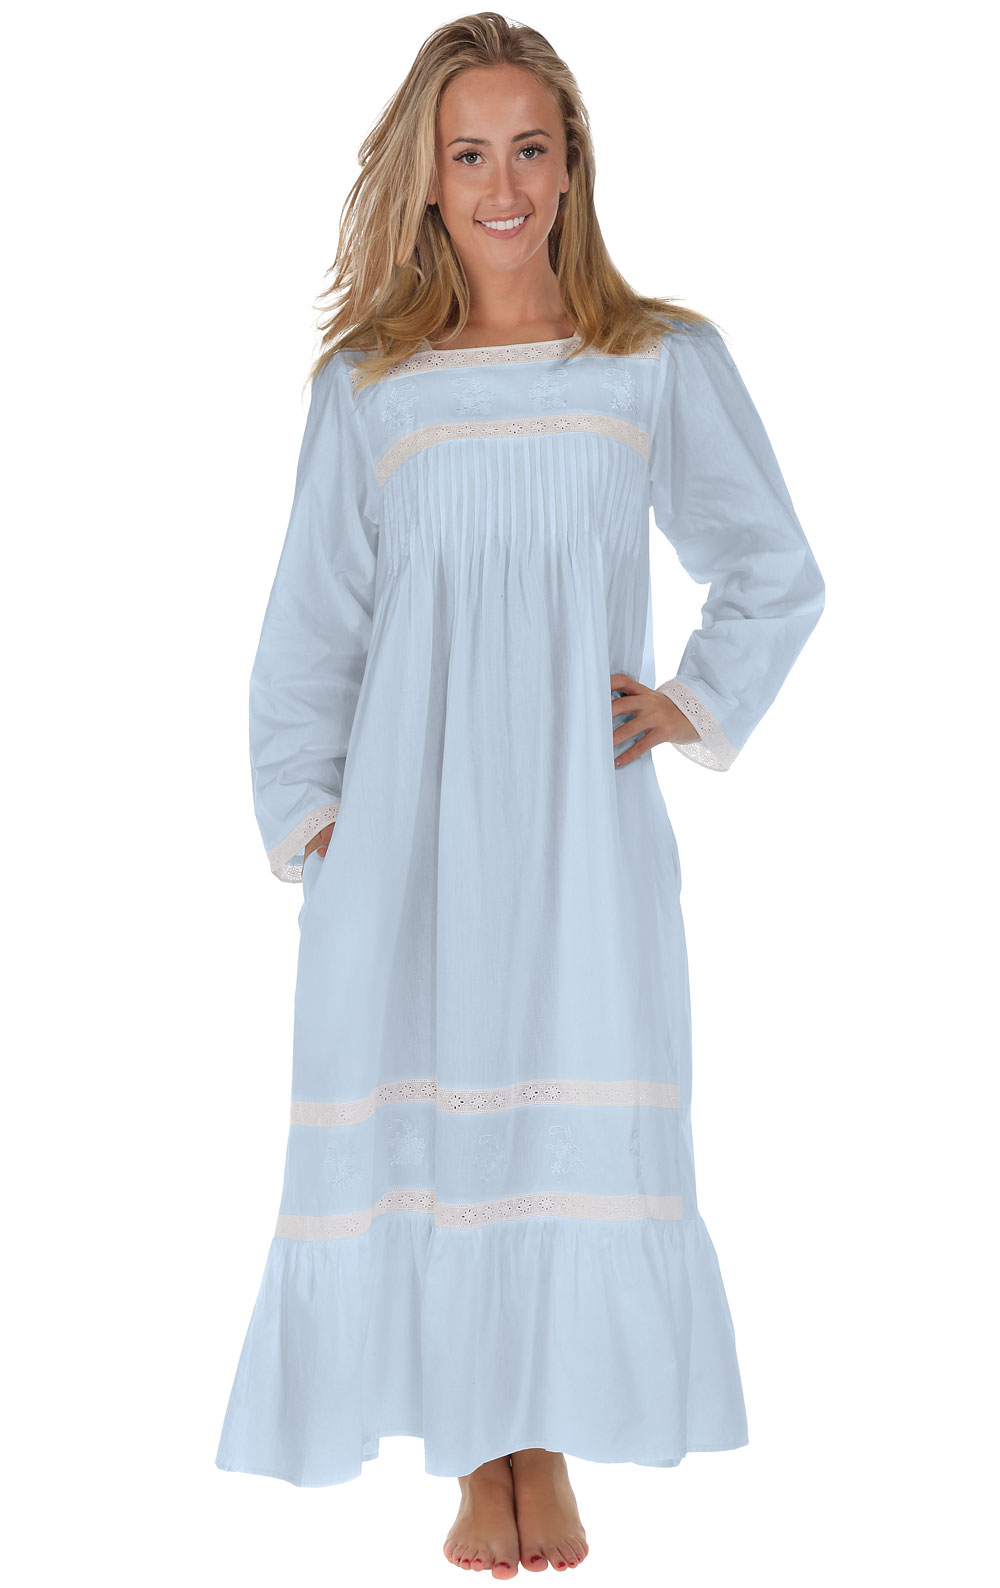 Long Sleeve Ladies Cotton Nightgown, Nightgowns for Women